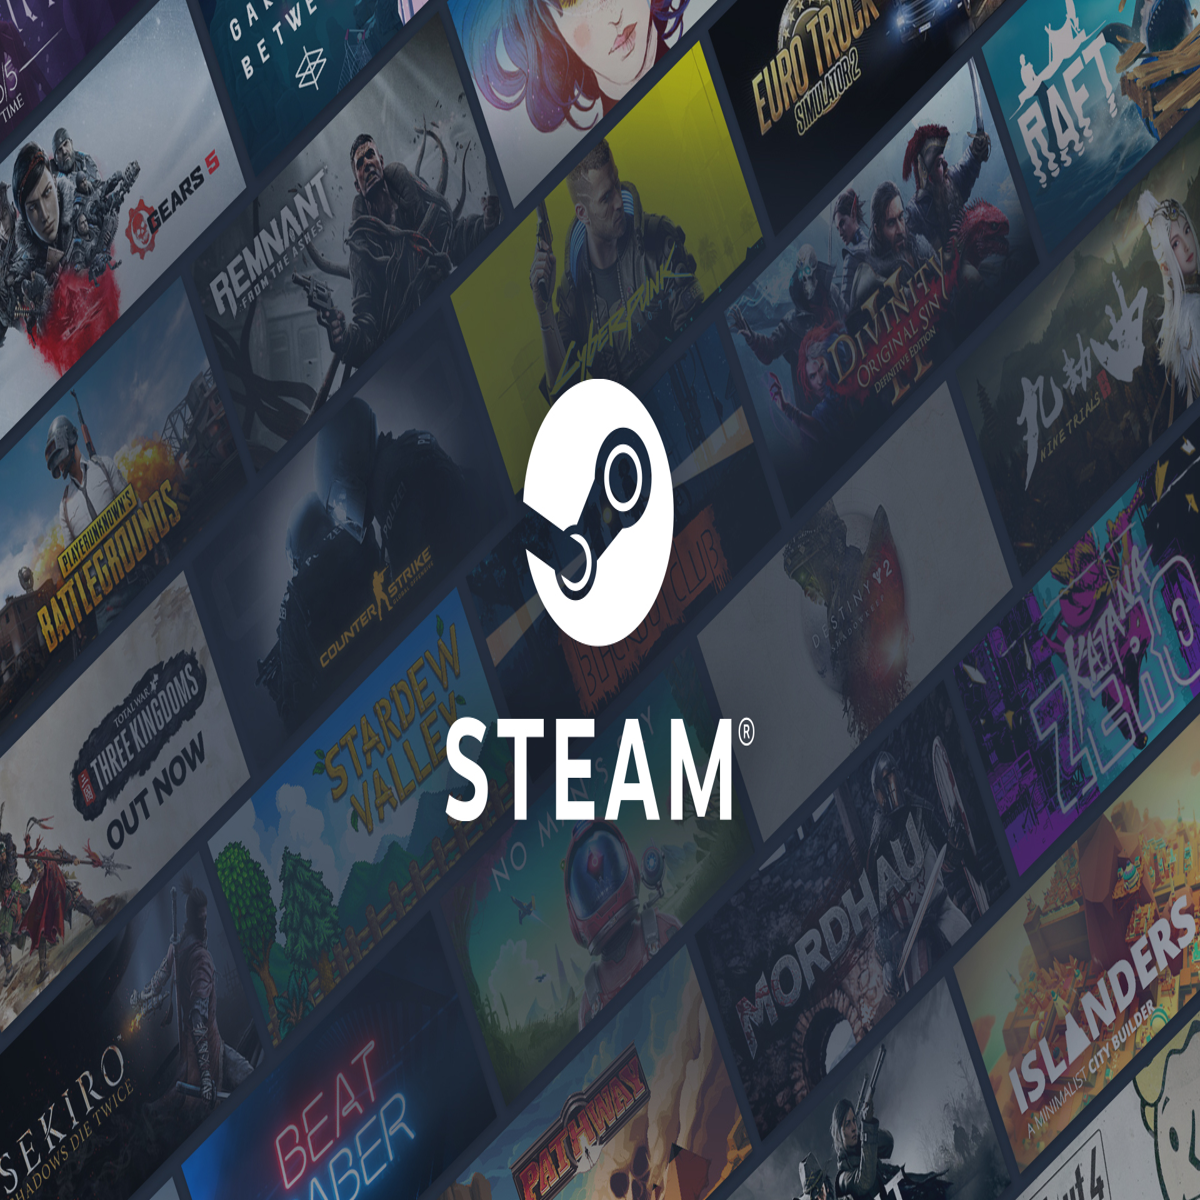 How to Publish Your Game on Steam? A Guide for Begginers